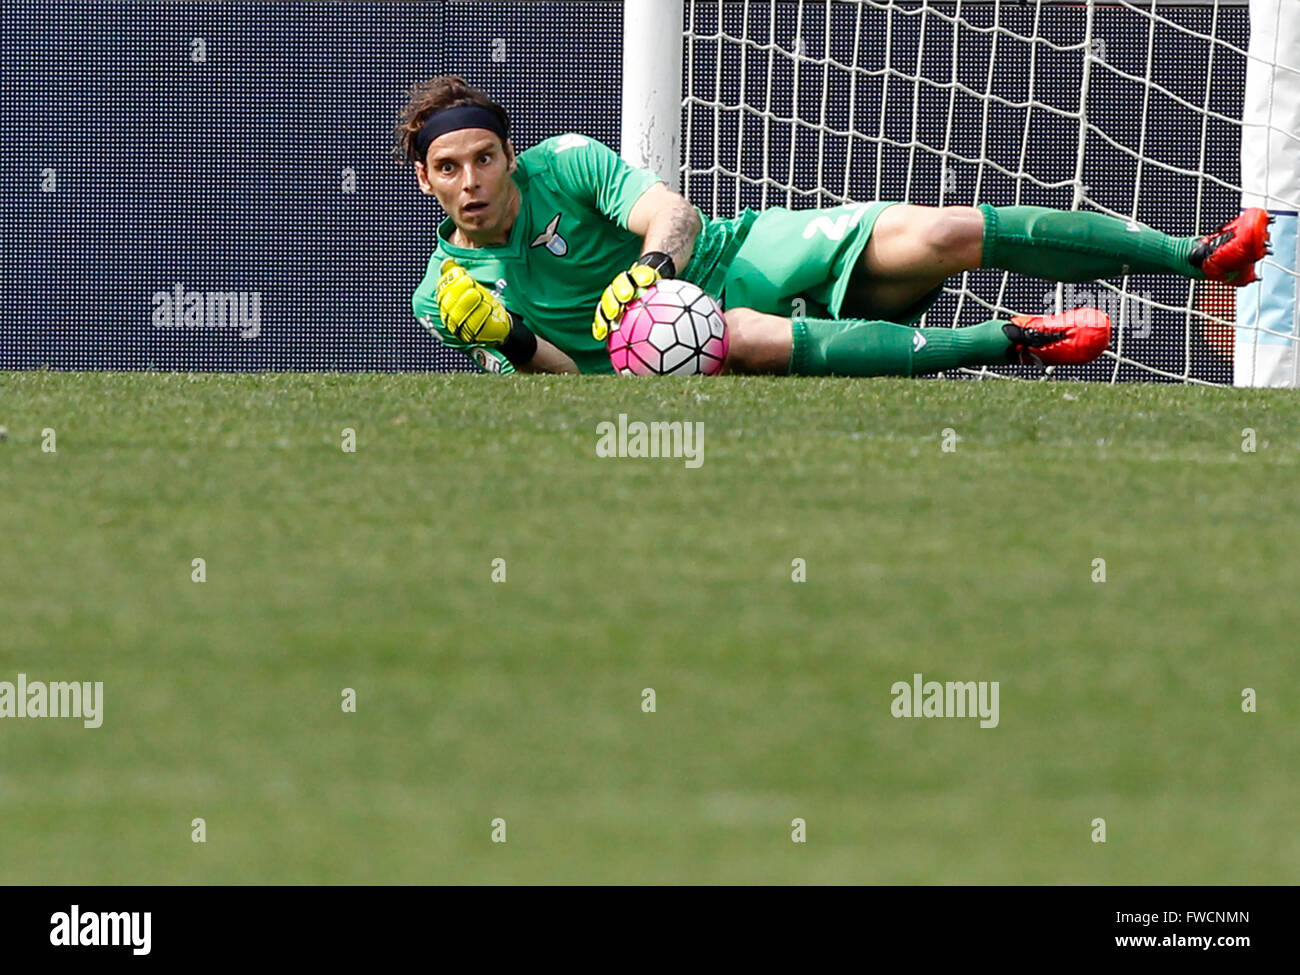 Rome, Italy. 03rd Apr, 2016. Lazio's goalkeeper Federico Marchetti holds the ball during the Italian Serie A football match between Lazio and Roma at the Olympic stadium. Roma defeats Lazio's city rivals 4-1. Goals were scored by El Shaarawy, Dzeko, Florenzi and Perotti for Roma, Parolo for Lazio. © Riccardo De Luca/Pacific Press/Alamy Live News Stock Photo